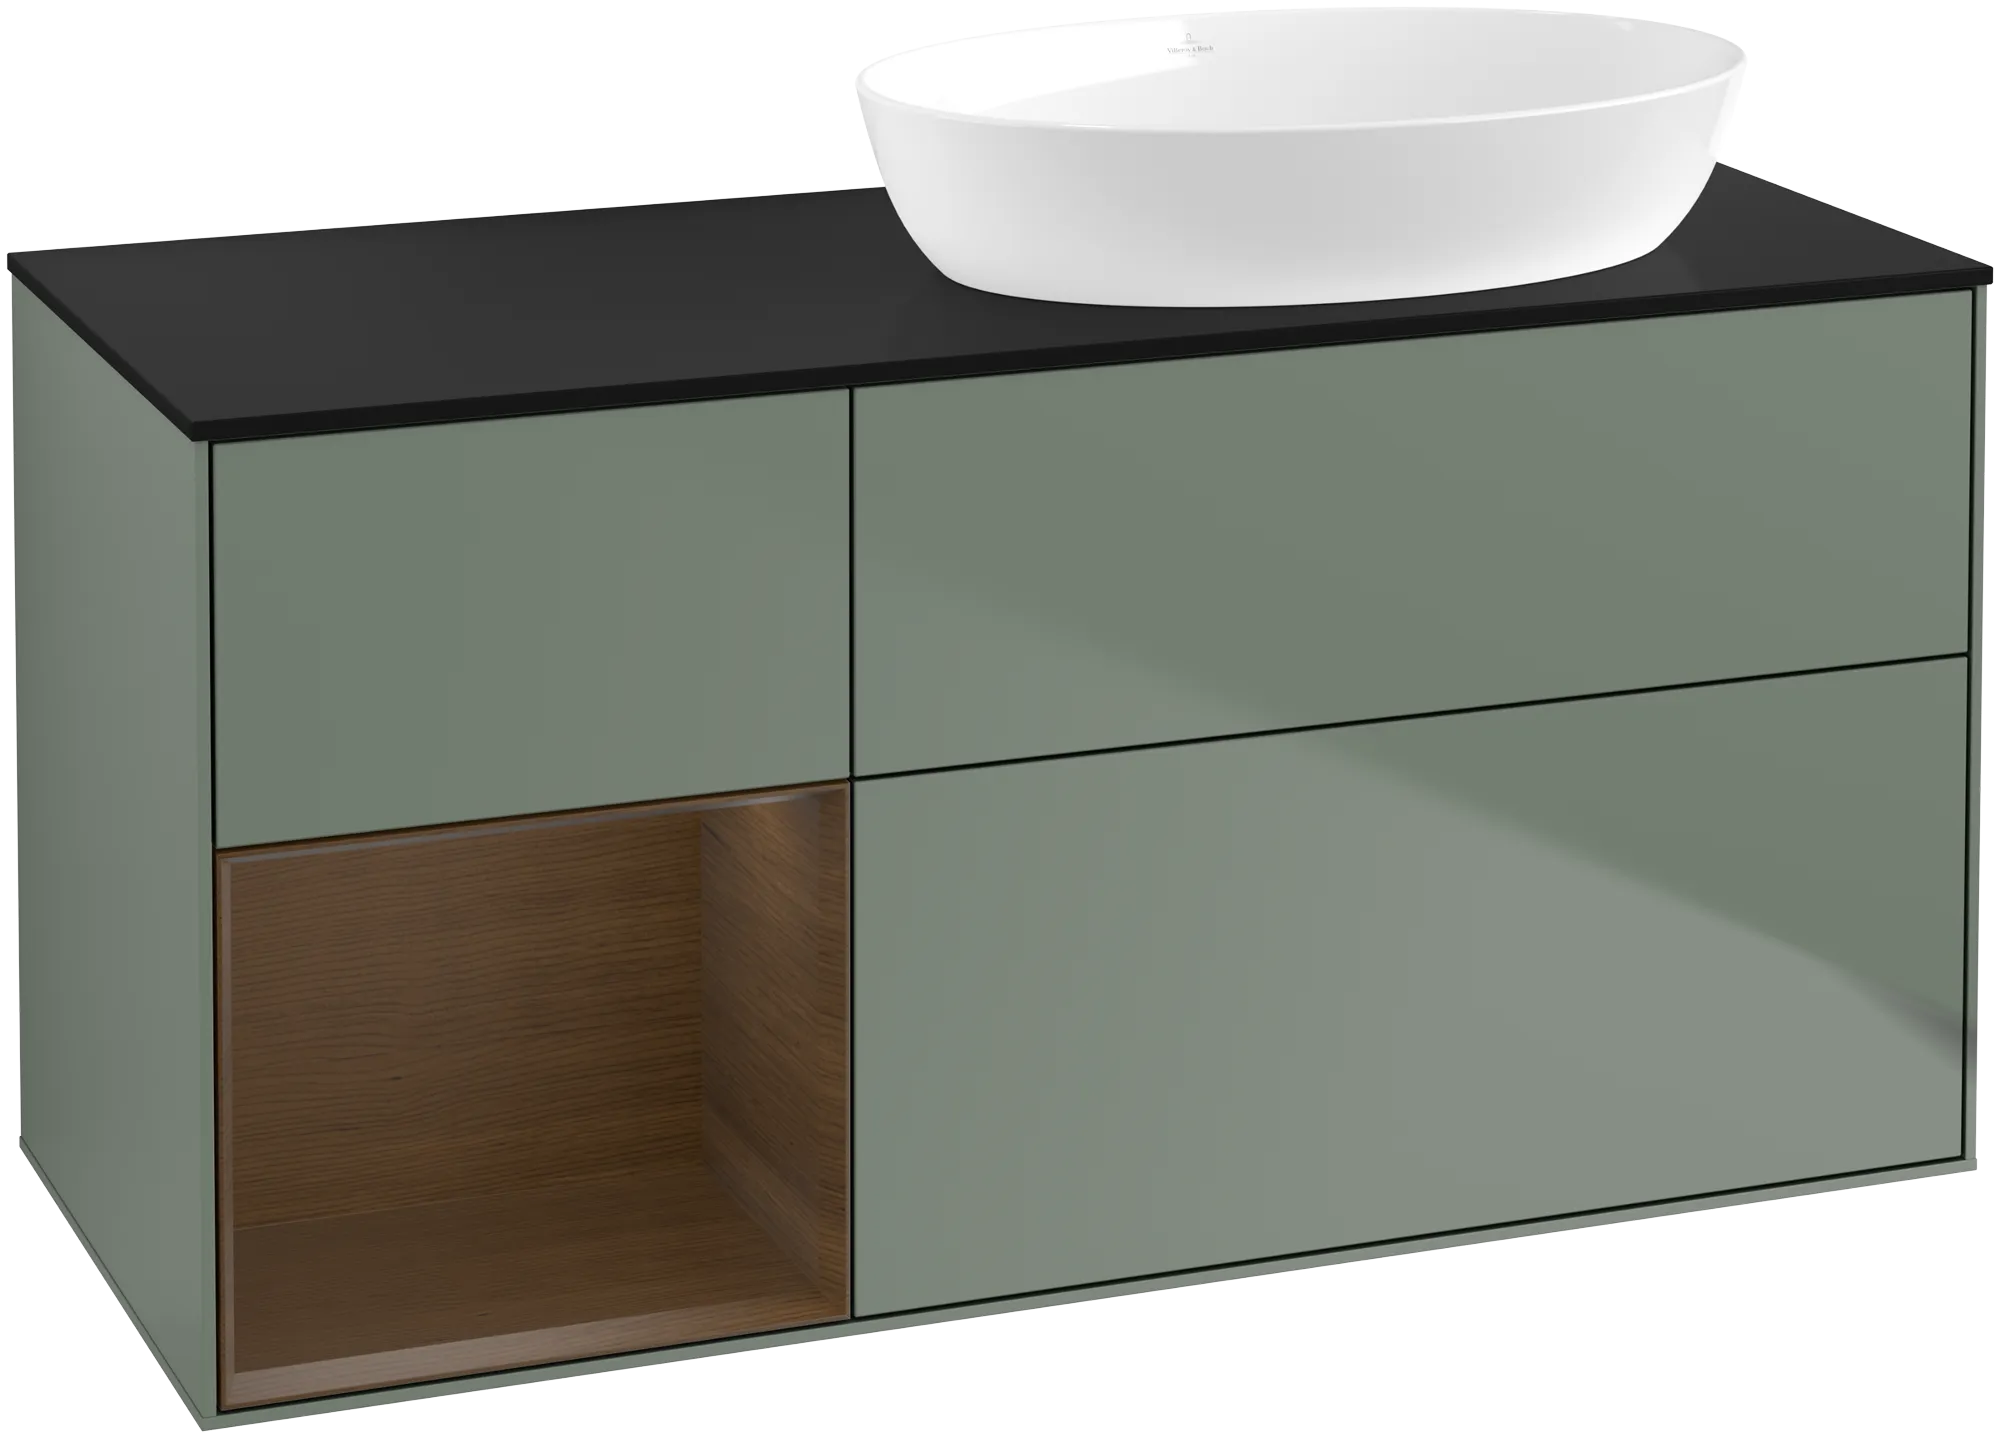 Picture of VILLEROY BOCH Finion Vanity unit, with lighting, 3 pull-out compartments, 1200 x 603 x 501 mm, Olive Matt Lacquer / Walnut Veneer / Glass Black Matt #GA42GNGM